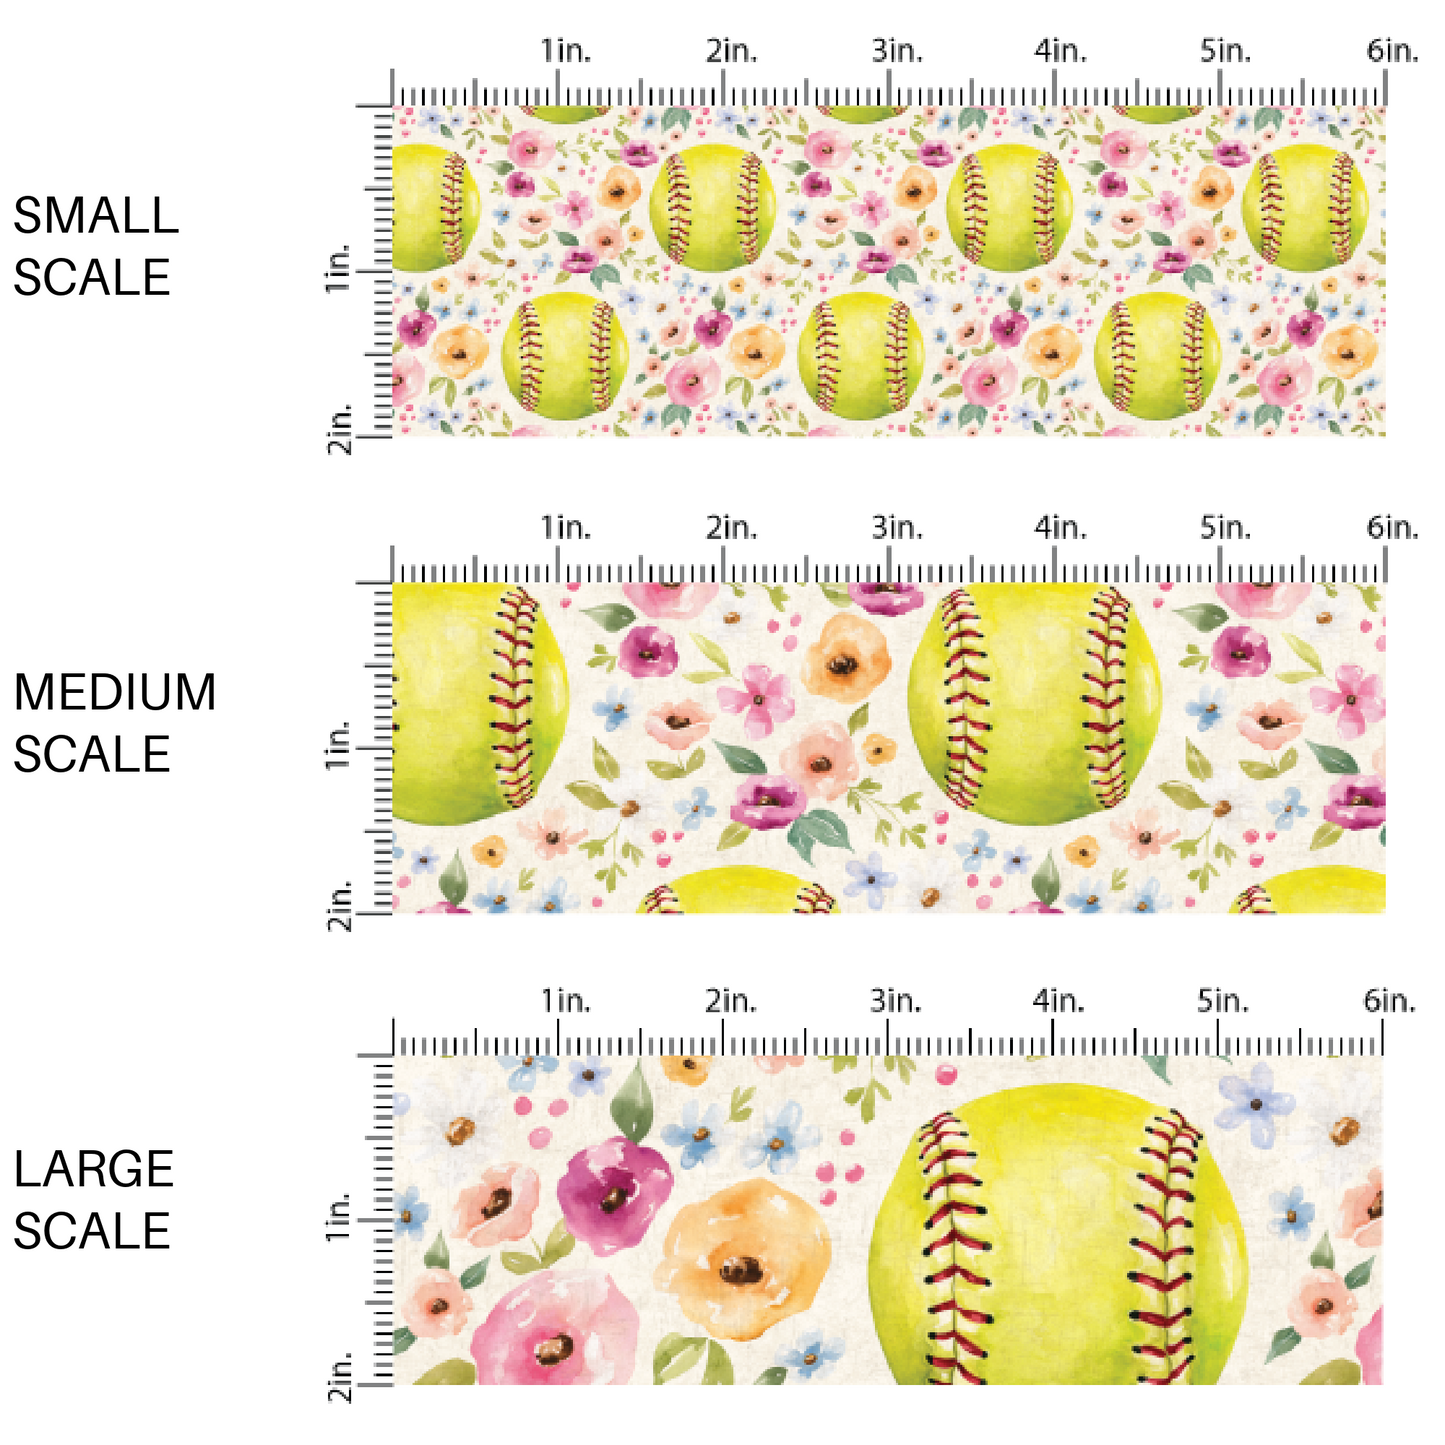 Pastel Florals and Softballs on Cream Fabric by the Yard scaled image guide.